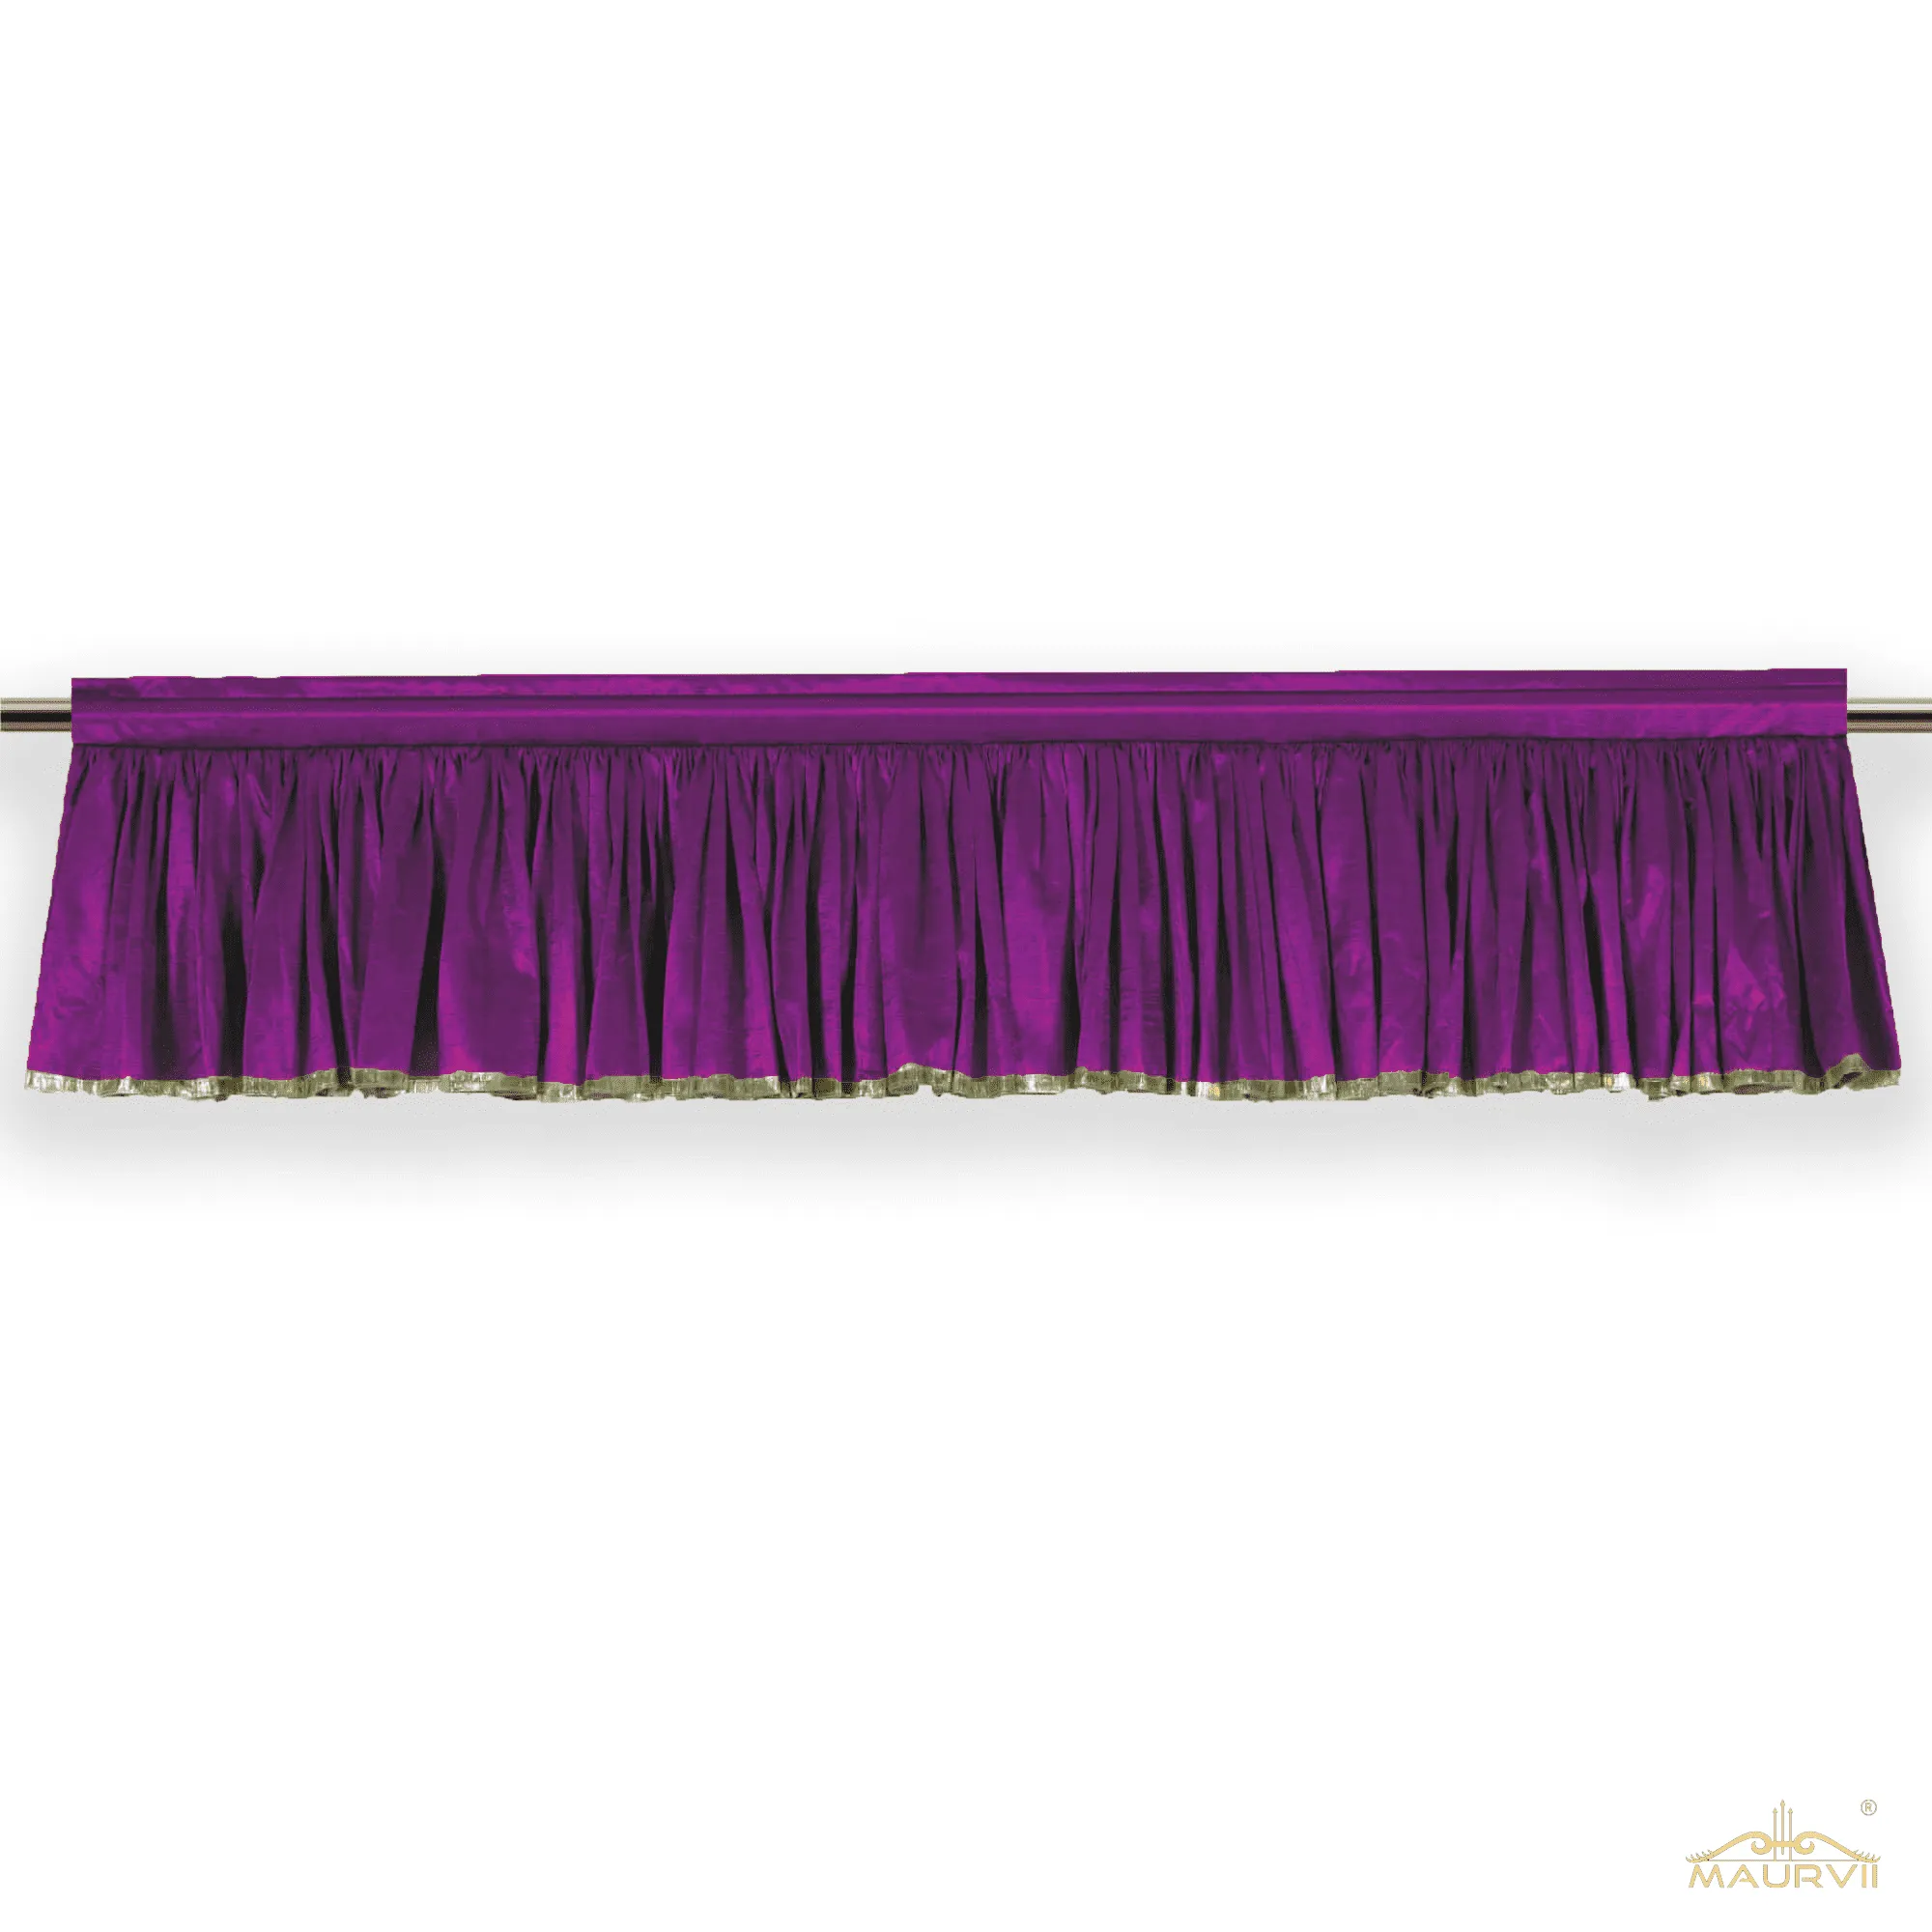 Purple Pleated Valance with golden trim at bottom